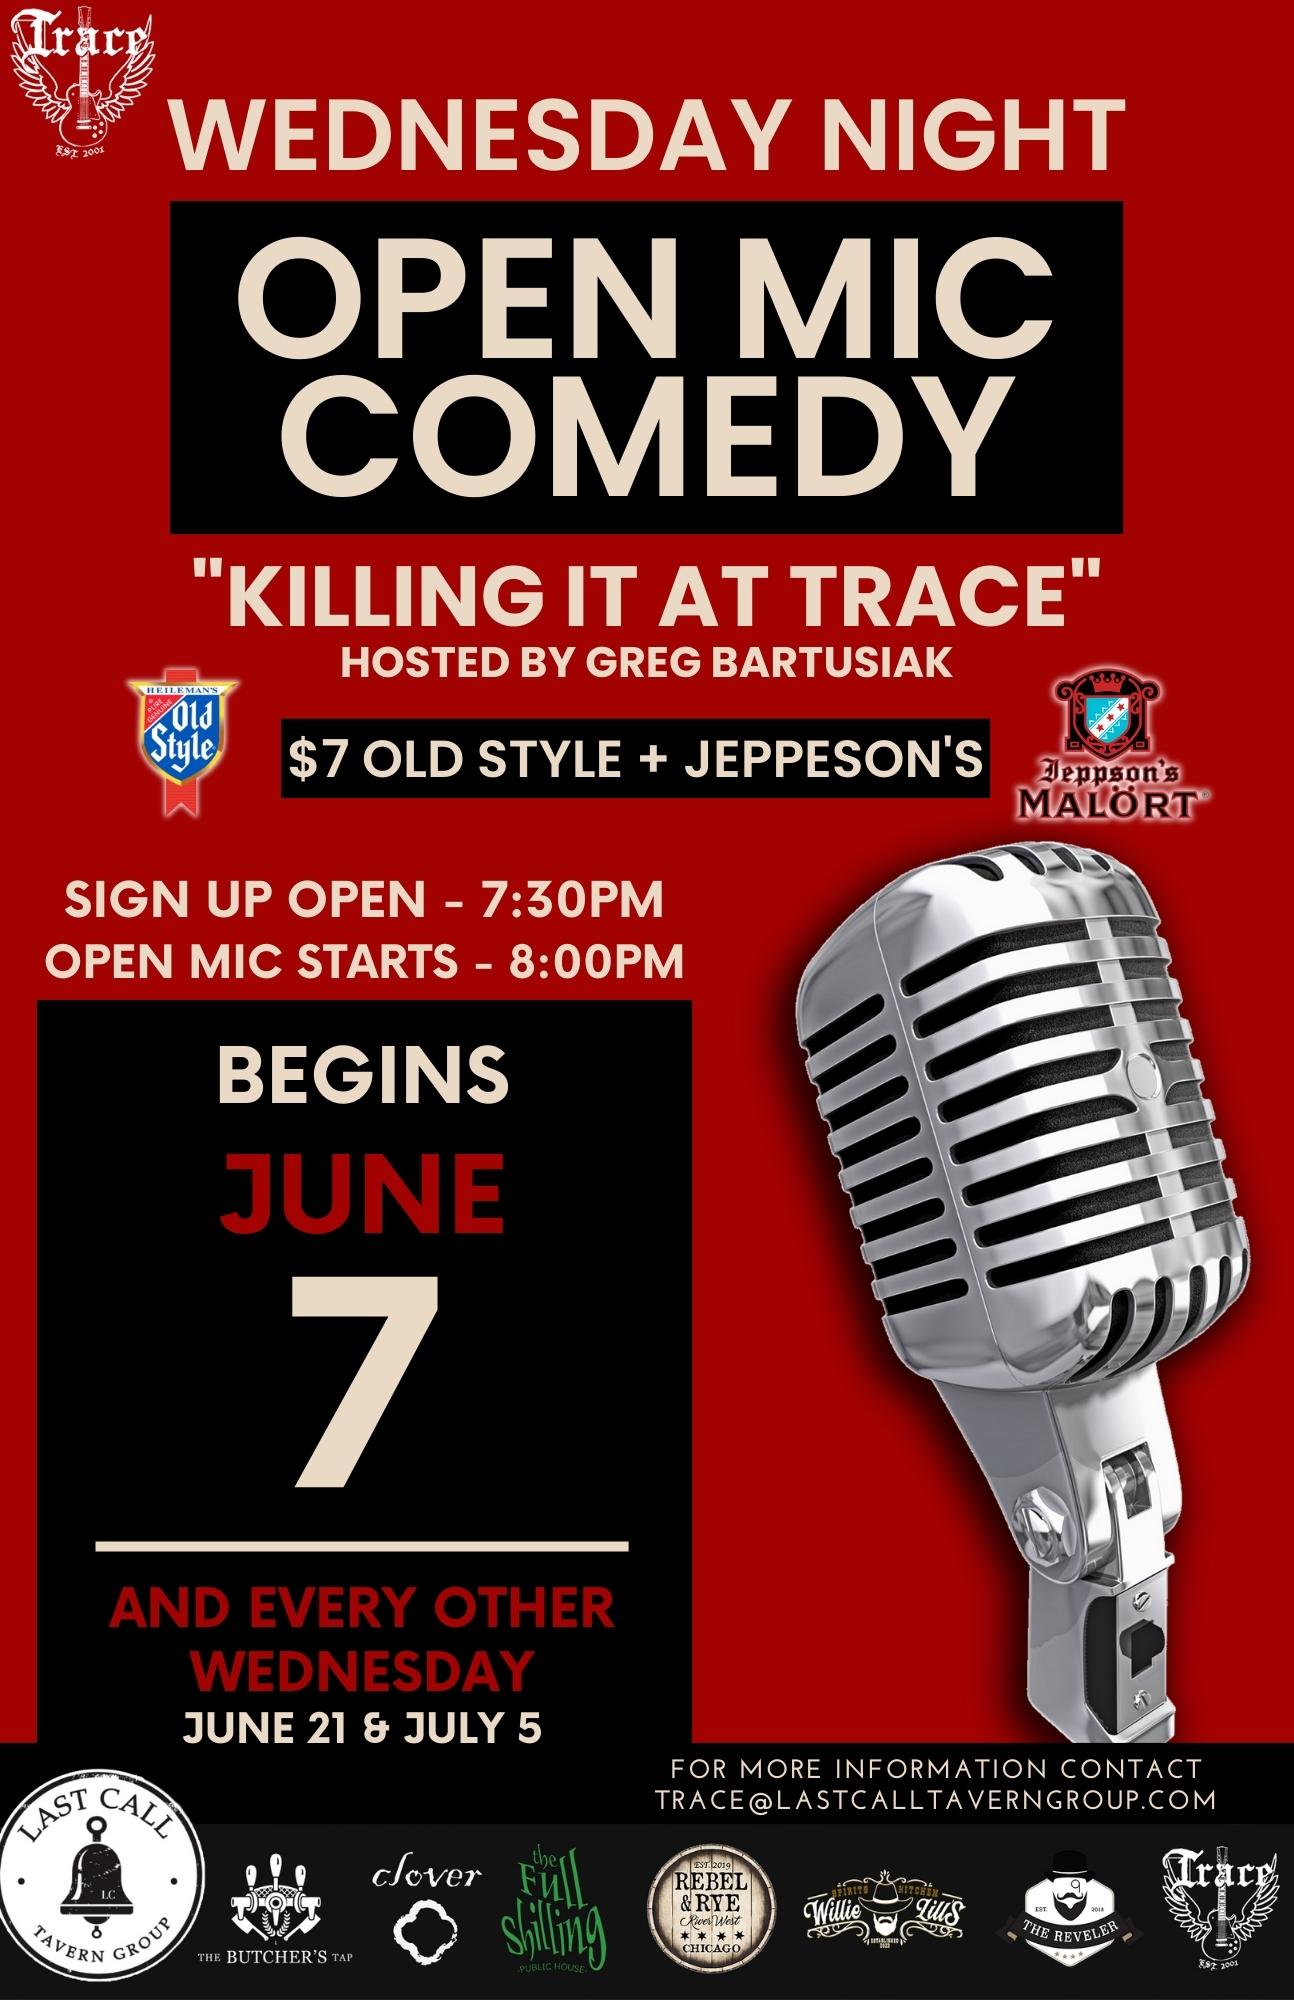 Wednesday Night Open Mic Comedy @ Trace